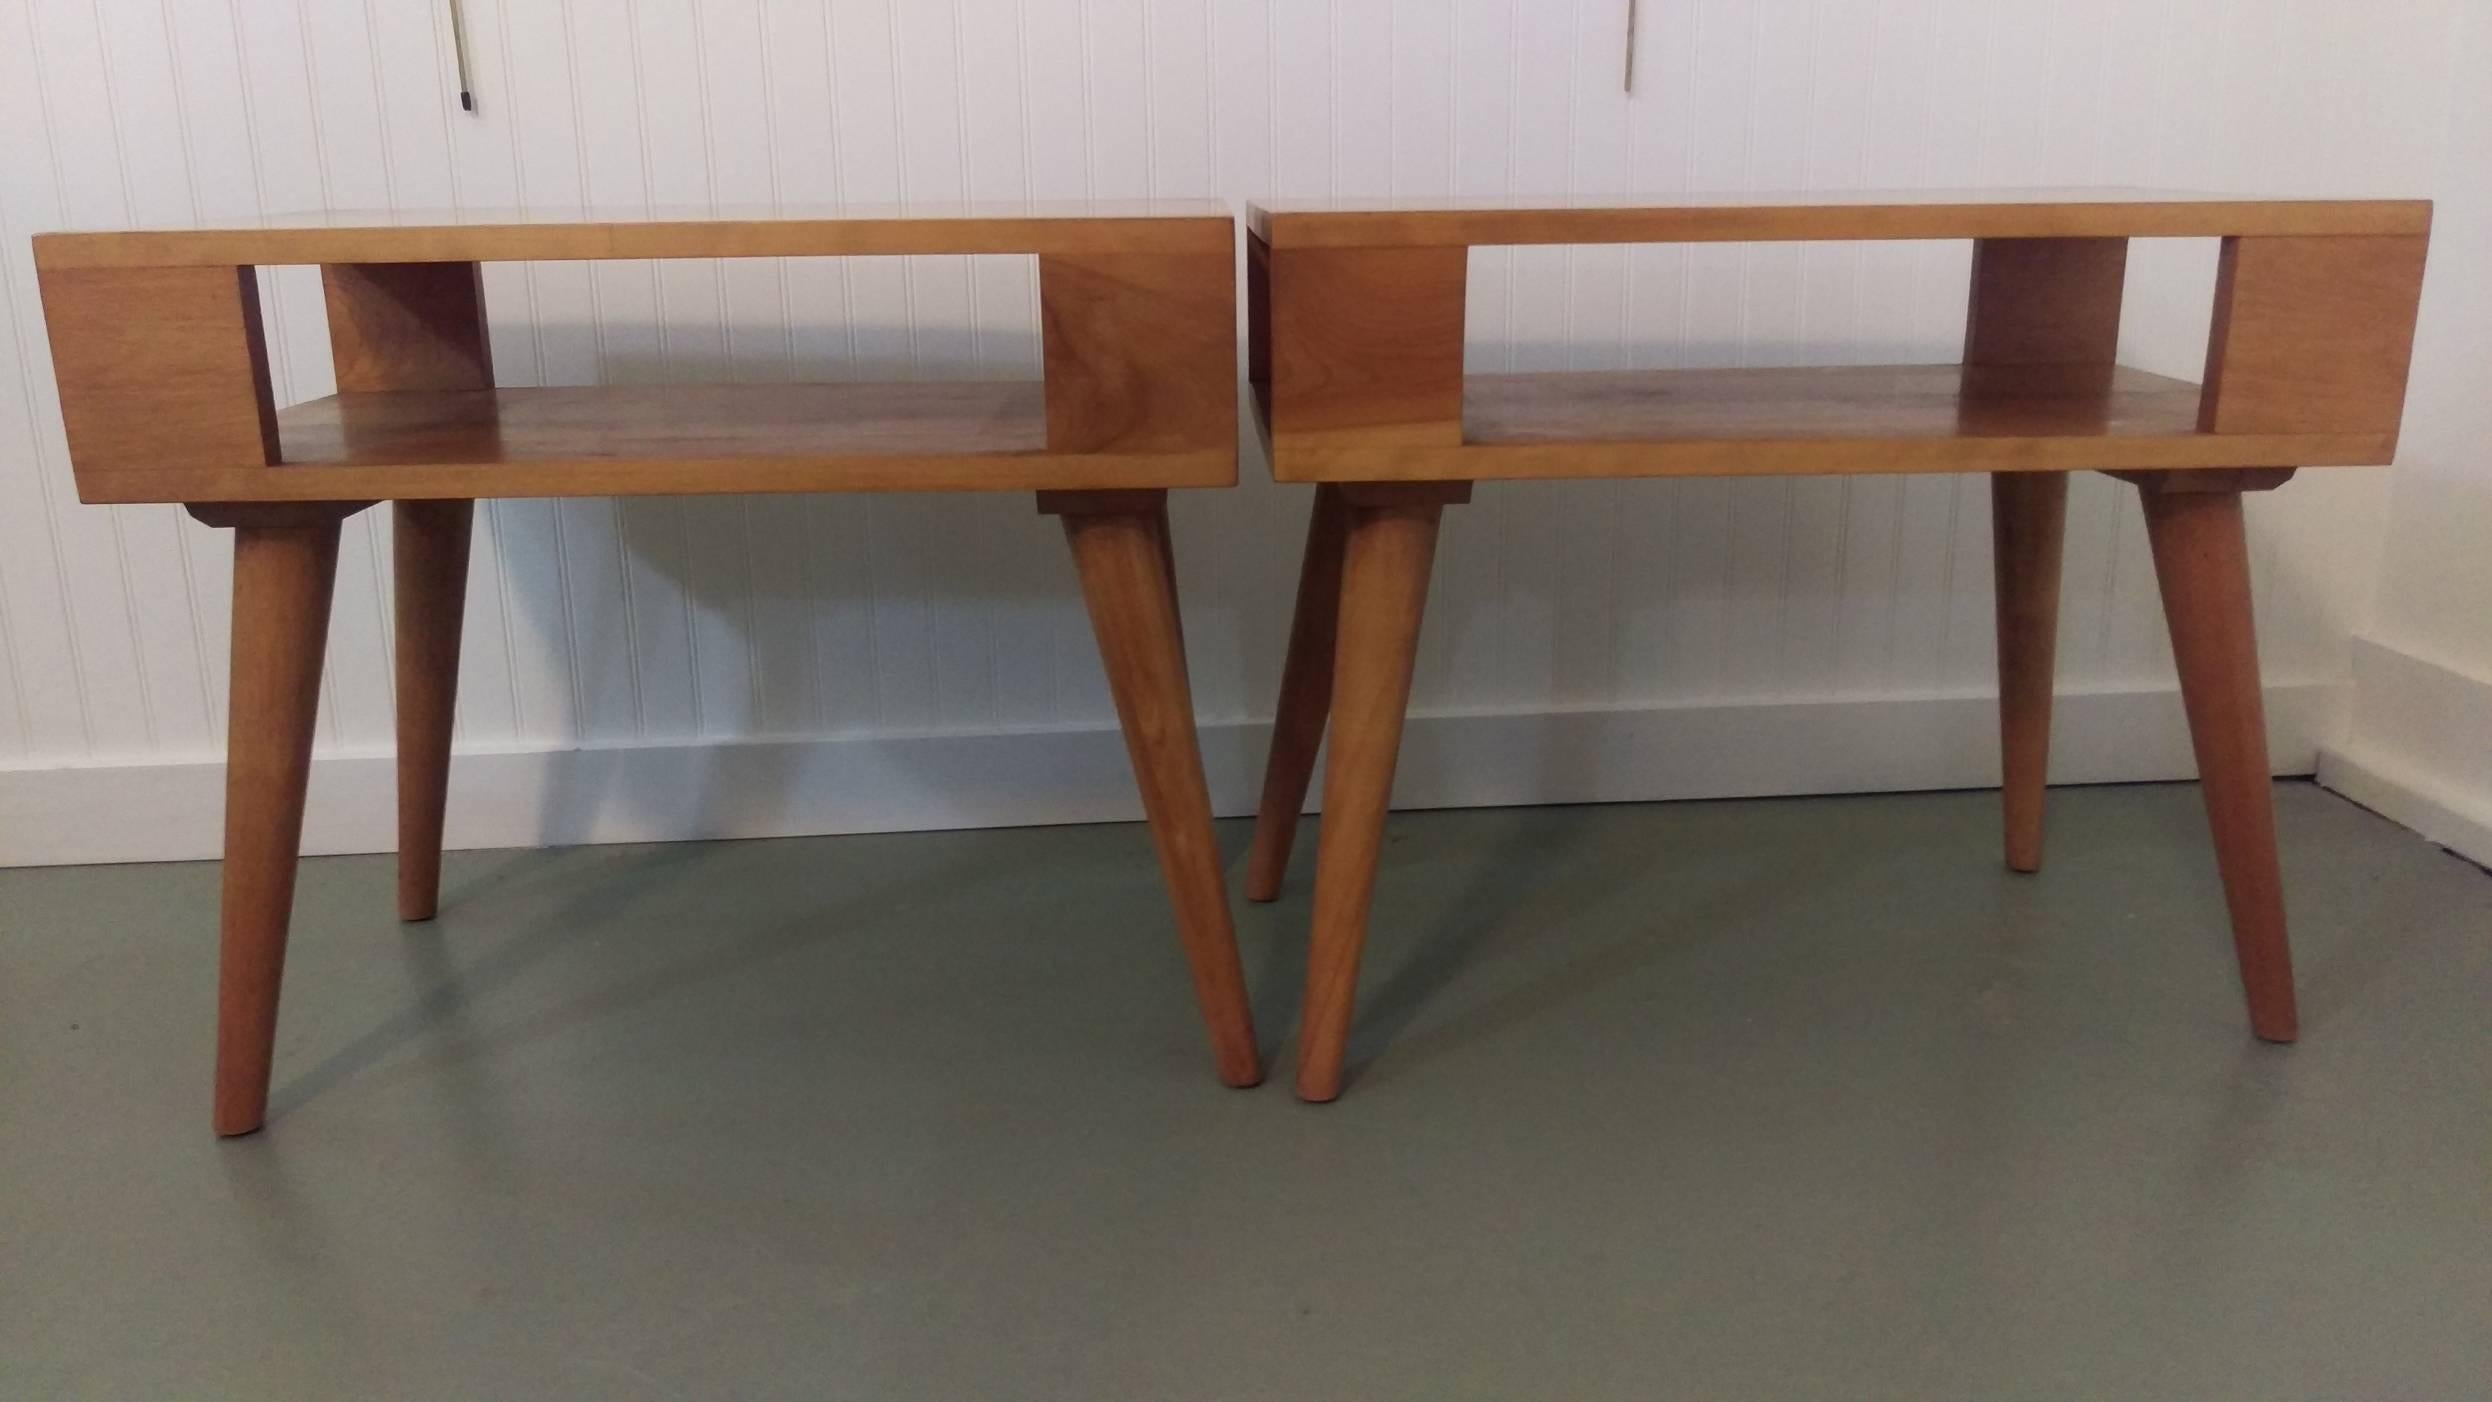 Versatile pair of modernist and architectural form end tables or nightstands. Designed by Russel Wright for Conant Ball International. Constructed in solid maple, in its original condition shows minor wear consistent with age and use.